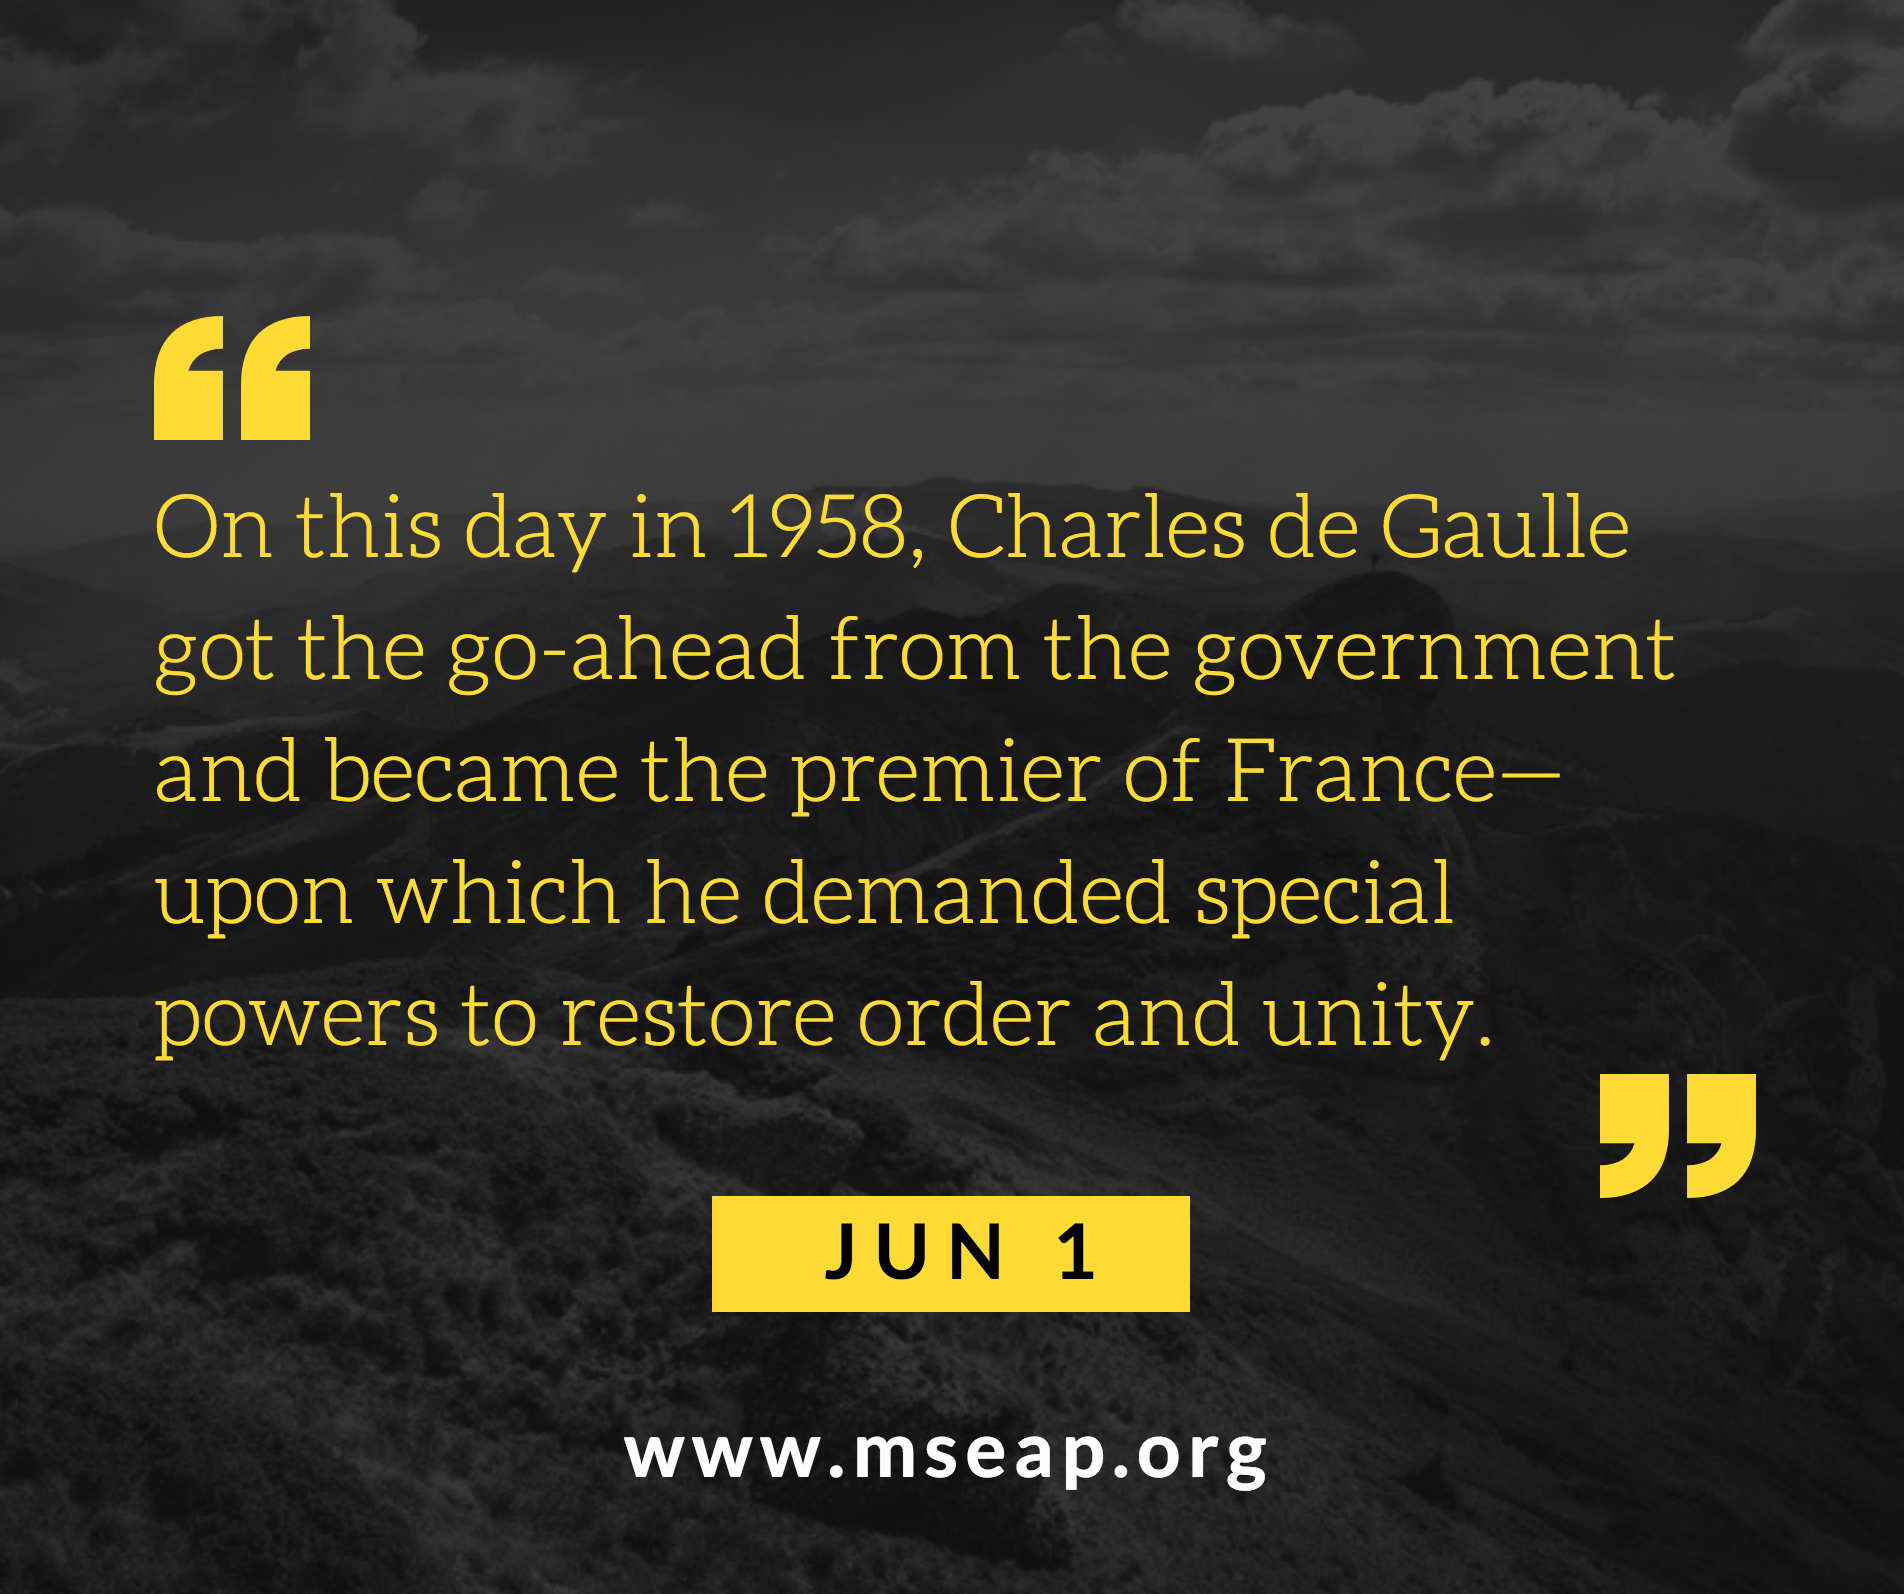 [Today in history] June 1